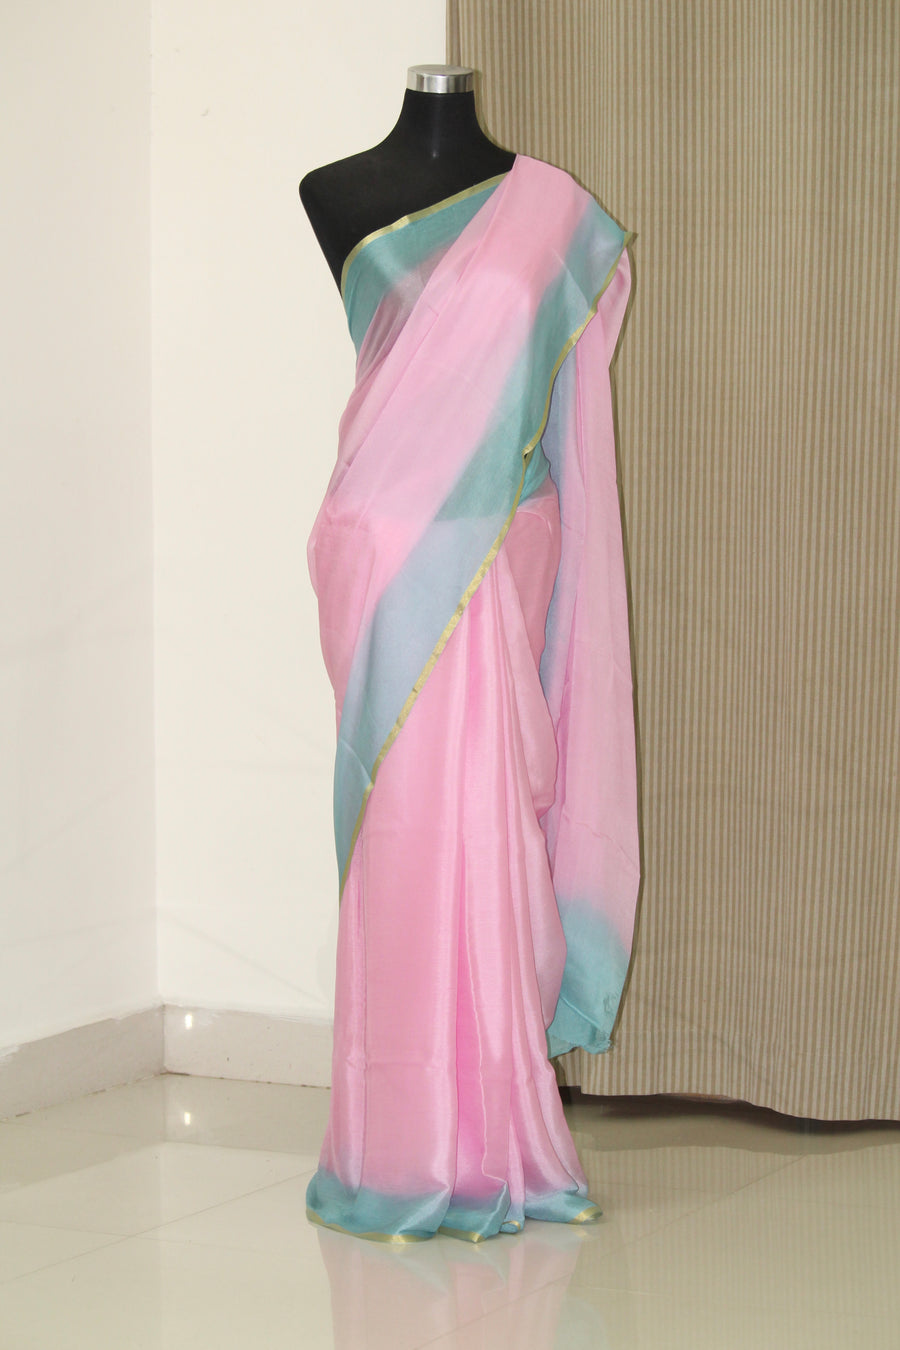 Buy chiffon sarees online at the best price. Buy pure silk chiffon saree. You can buy pure silk sarees from akrithi with silk mark. At akrithi you can get any colour saree of your choice as we dye based on order. Our dyeing is done by the best dyers, using quality and azo free dye. We have plain saree and tie and dye saree and shibori saree. Silk saree online shopping. Buy tie and dye, shibori and leheriya sarees online.